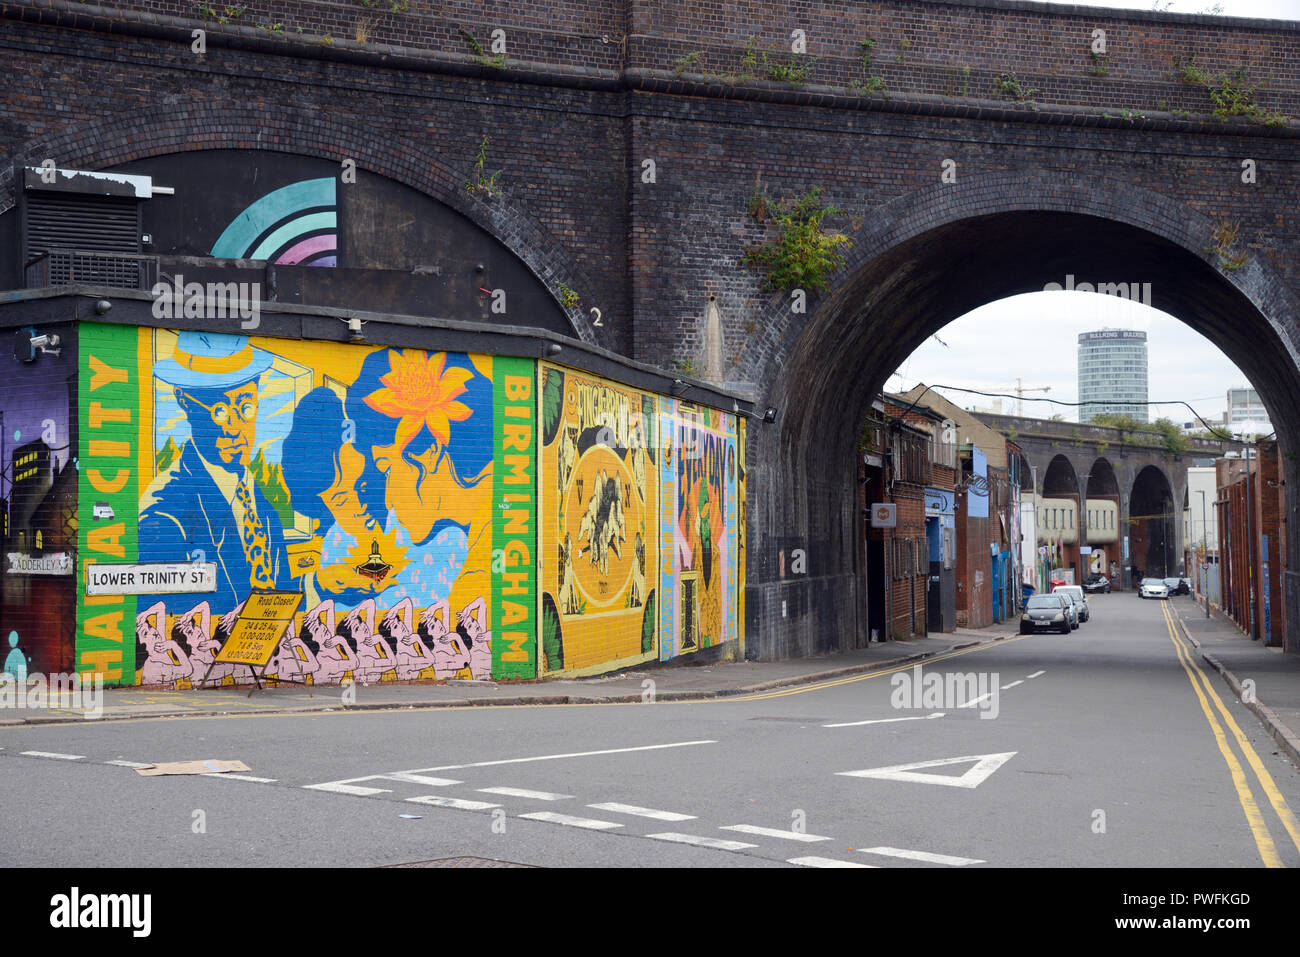 Street Art & Railway Arches in the Old Industrial Streets of Digbeth Birmingham England Stock Photo